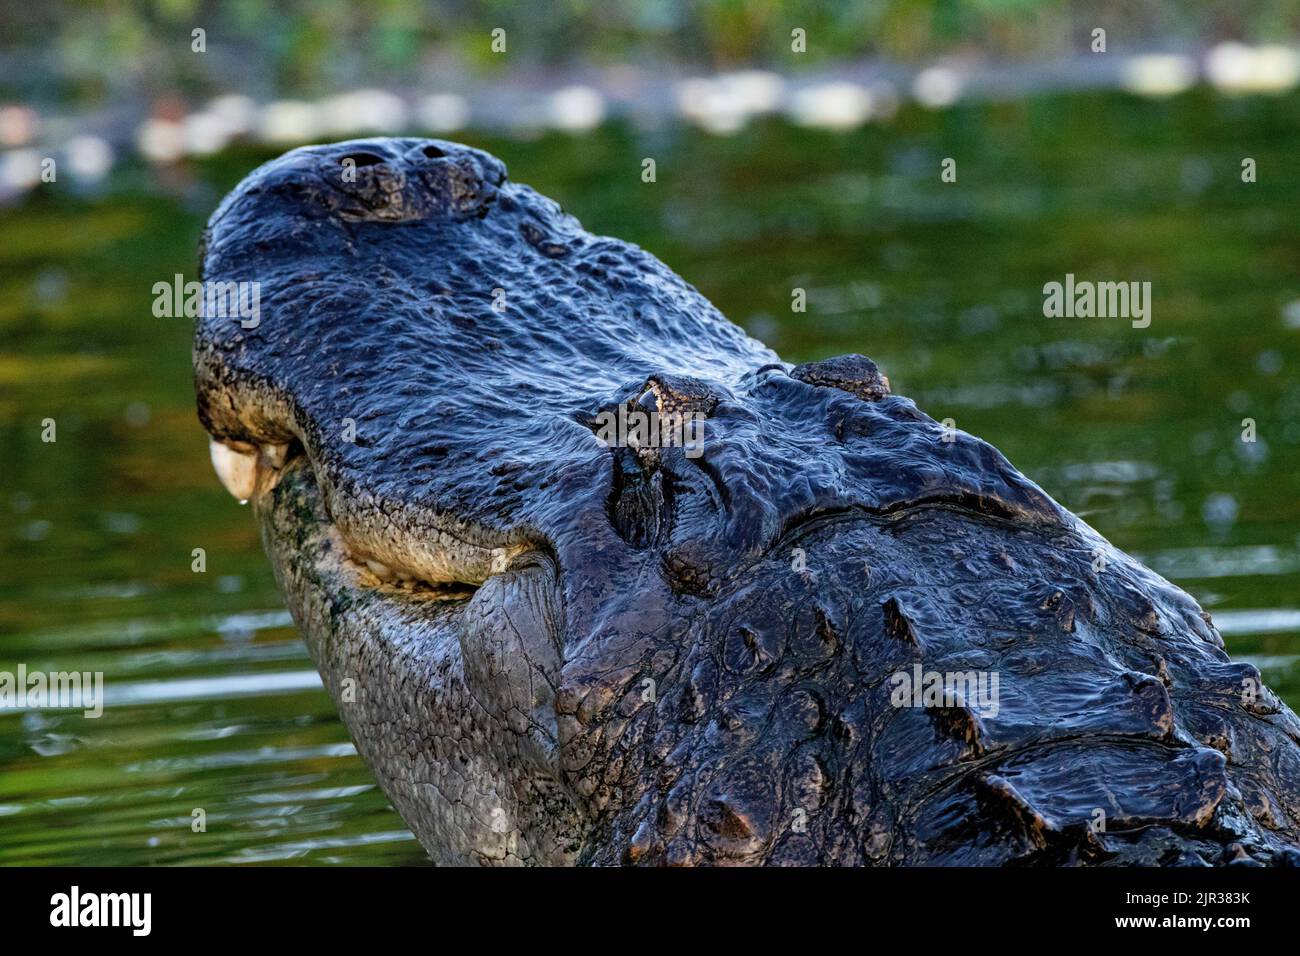 American alligator swims and rears its head upward while in the water Stock Photo